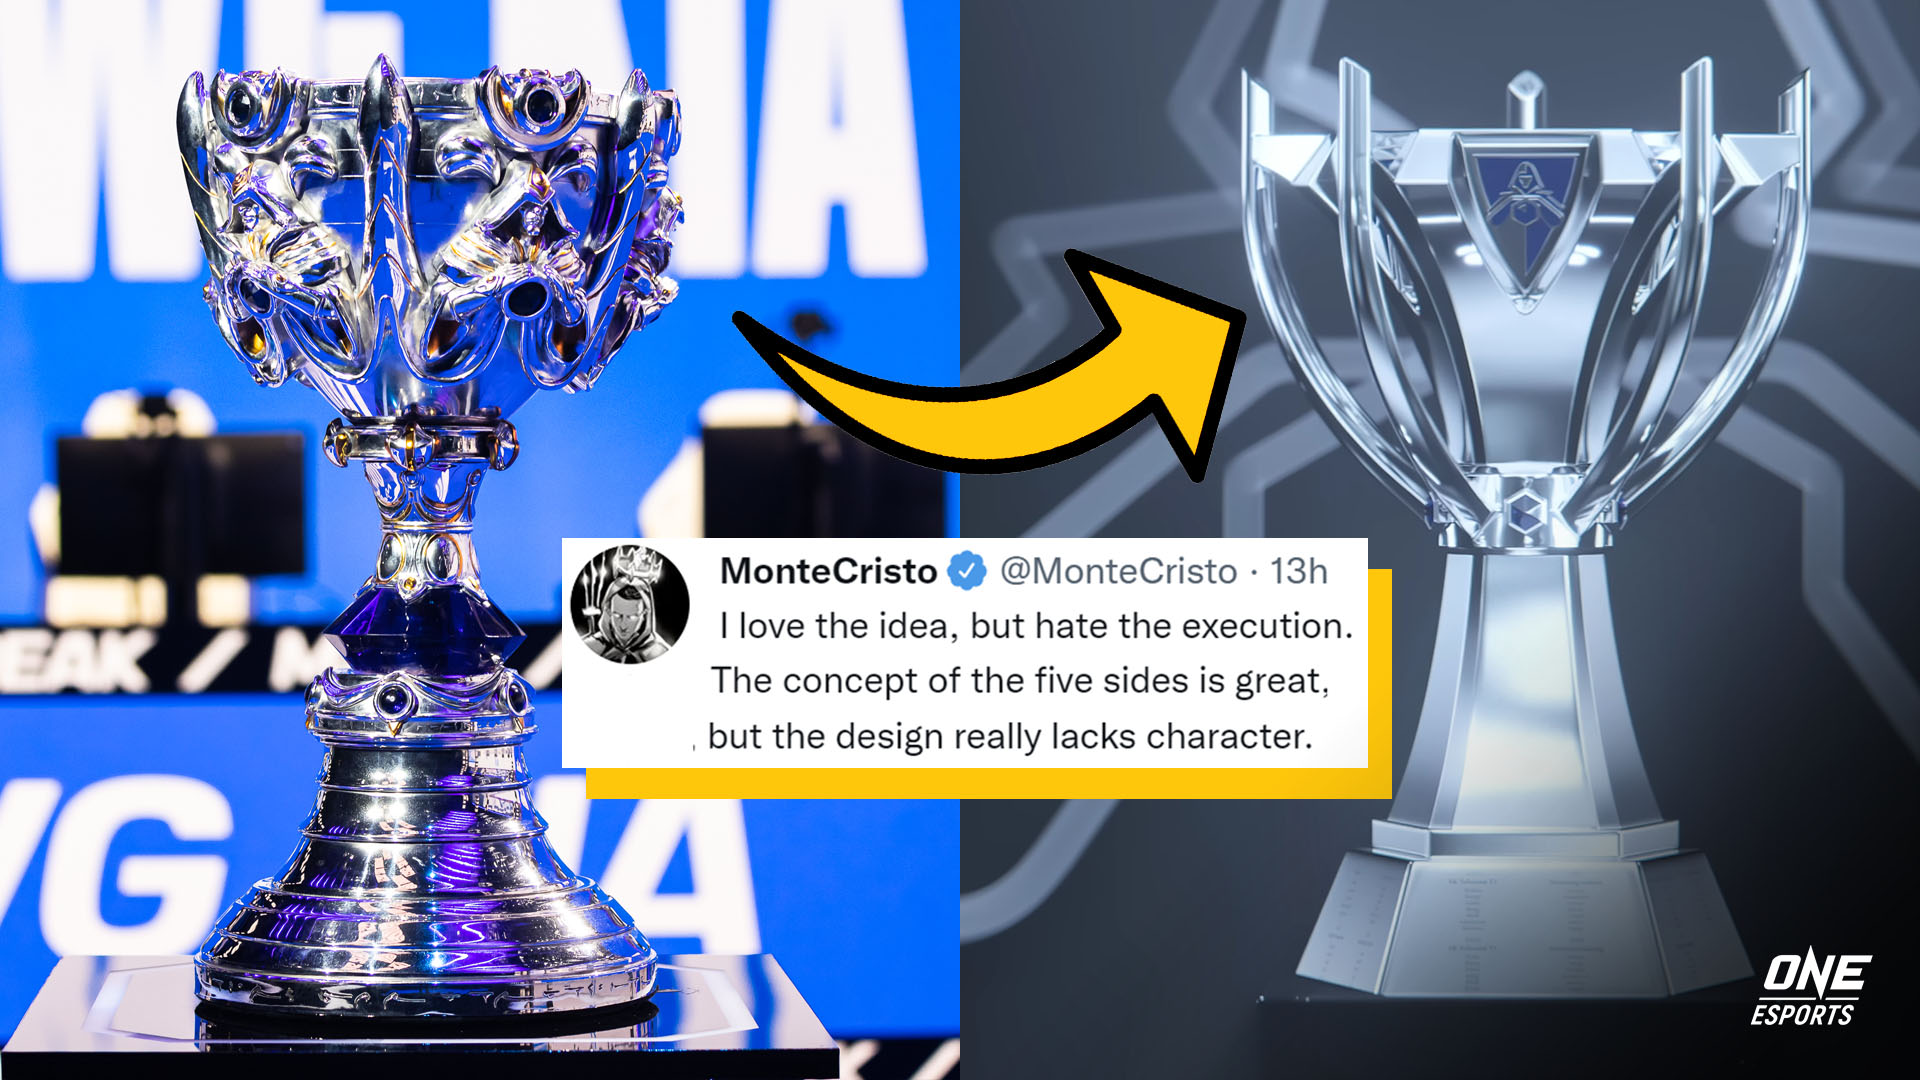 Worlds 2022 trophy gets mixed reactions from LoL community | ONE